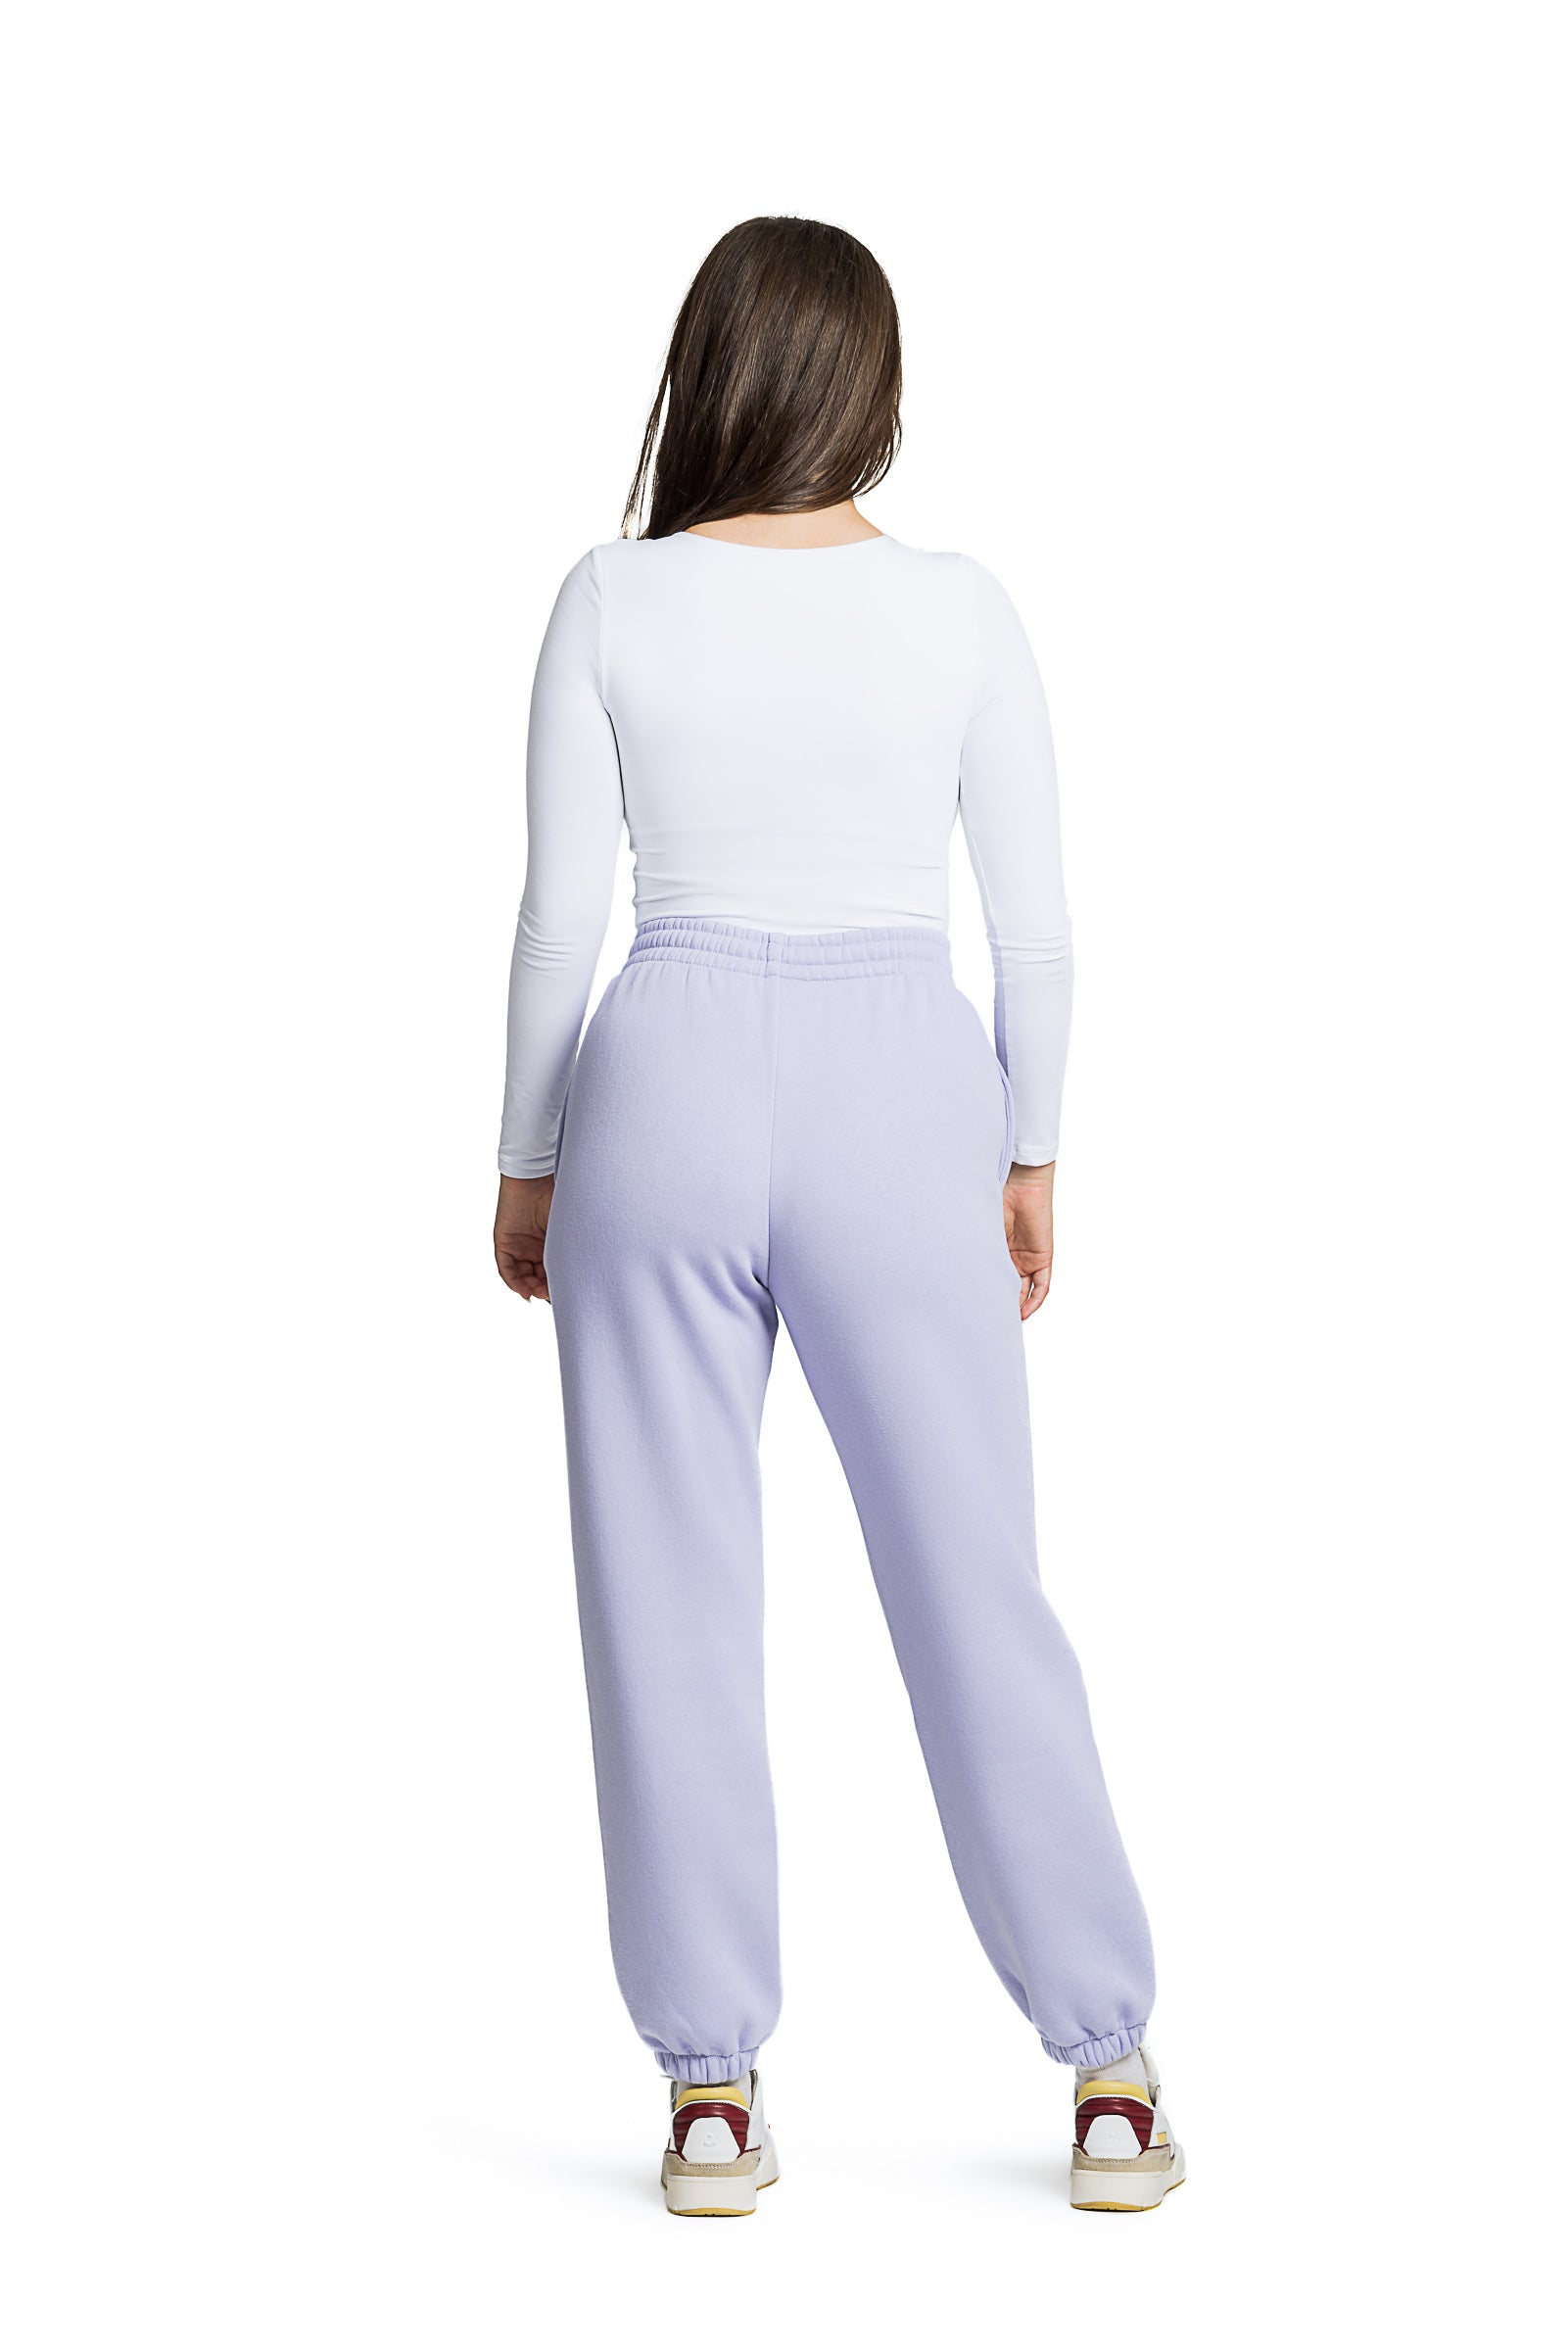 Buy JC Collection Women Regular Fit Dry Fit Joggers - Track Pants